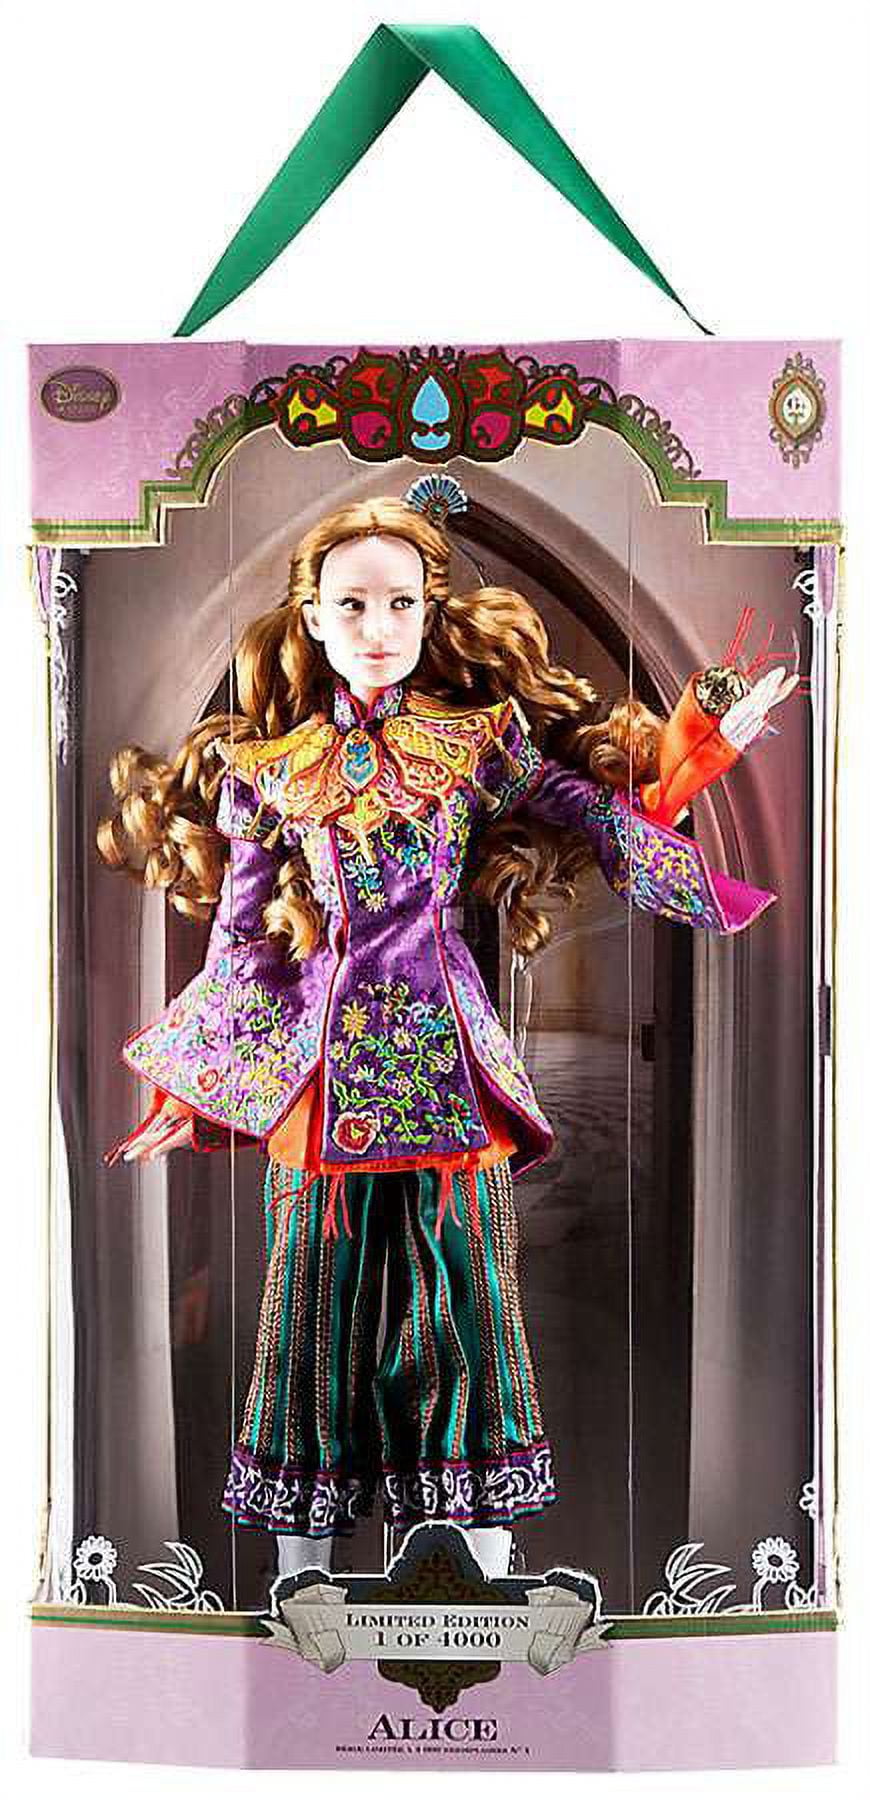 3 Disney Alice in Wonderland Through The Looking Glass Dolls for